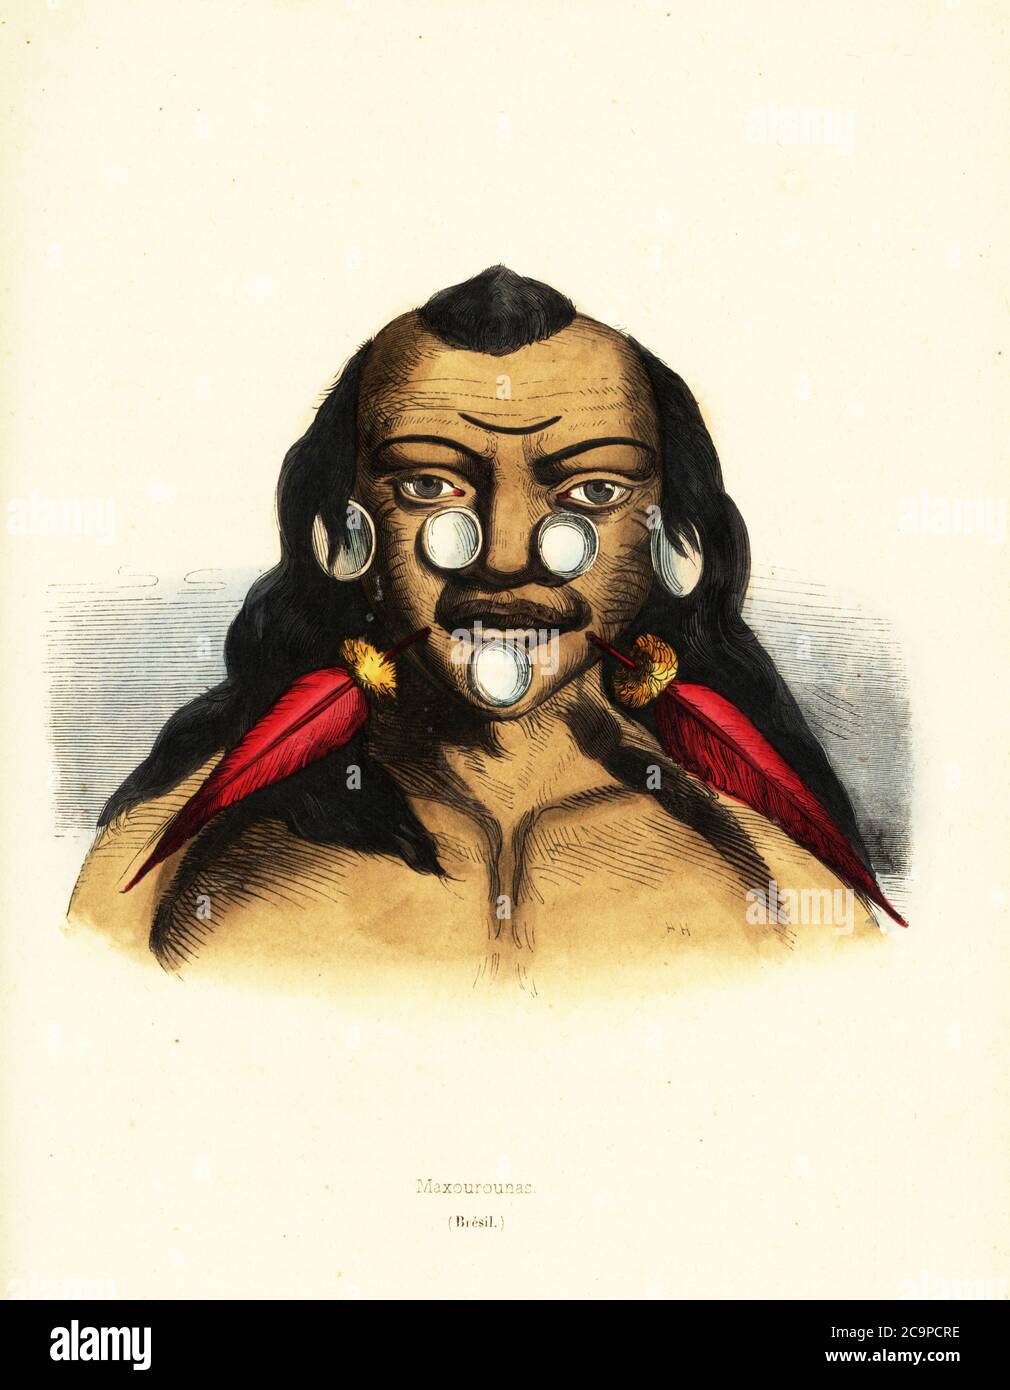 Matses or Matis warrior of Brazil, with facial tattoos, labrets, and piercings with macaw feathers and snail shells. Maxurunas Indian, Brazil. Maxourounas (Bresil). Handcoloured woodcut by Henri Hendrickx after Johann Baptist von Spix and Karl von Martius from Auguste Wahlen's Moeurs, Usages et Costumes de tous les Peuples du Monde, (Manners, Customs and Costumes of all the People of the World) Librairie Historique-Artistique, Brussels, 1845. Stock Photo